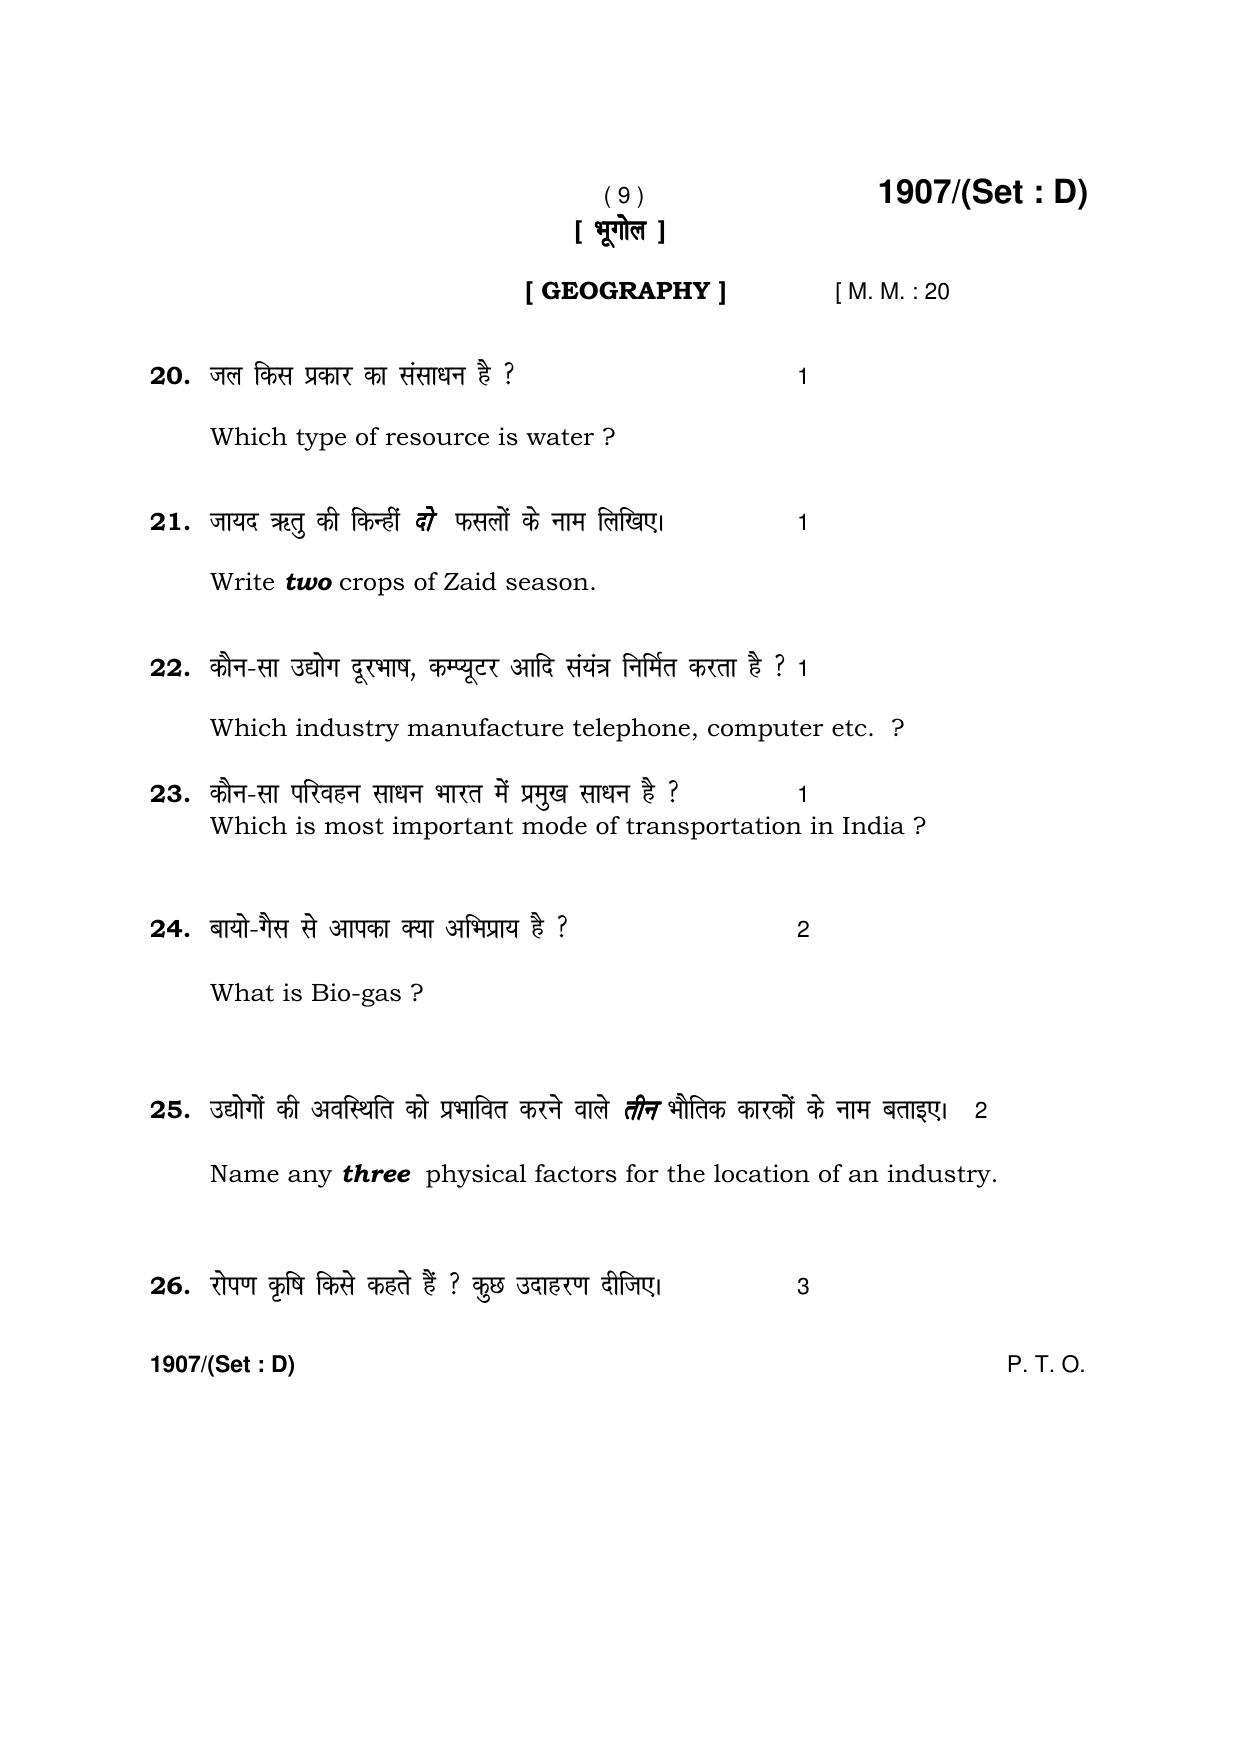 Haryana Board HBSE Class 10 Social Science -D 2017 Question Paper - Page 9